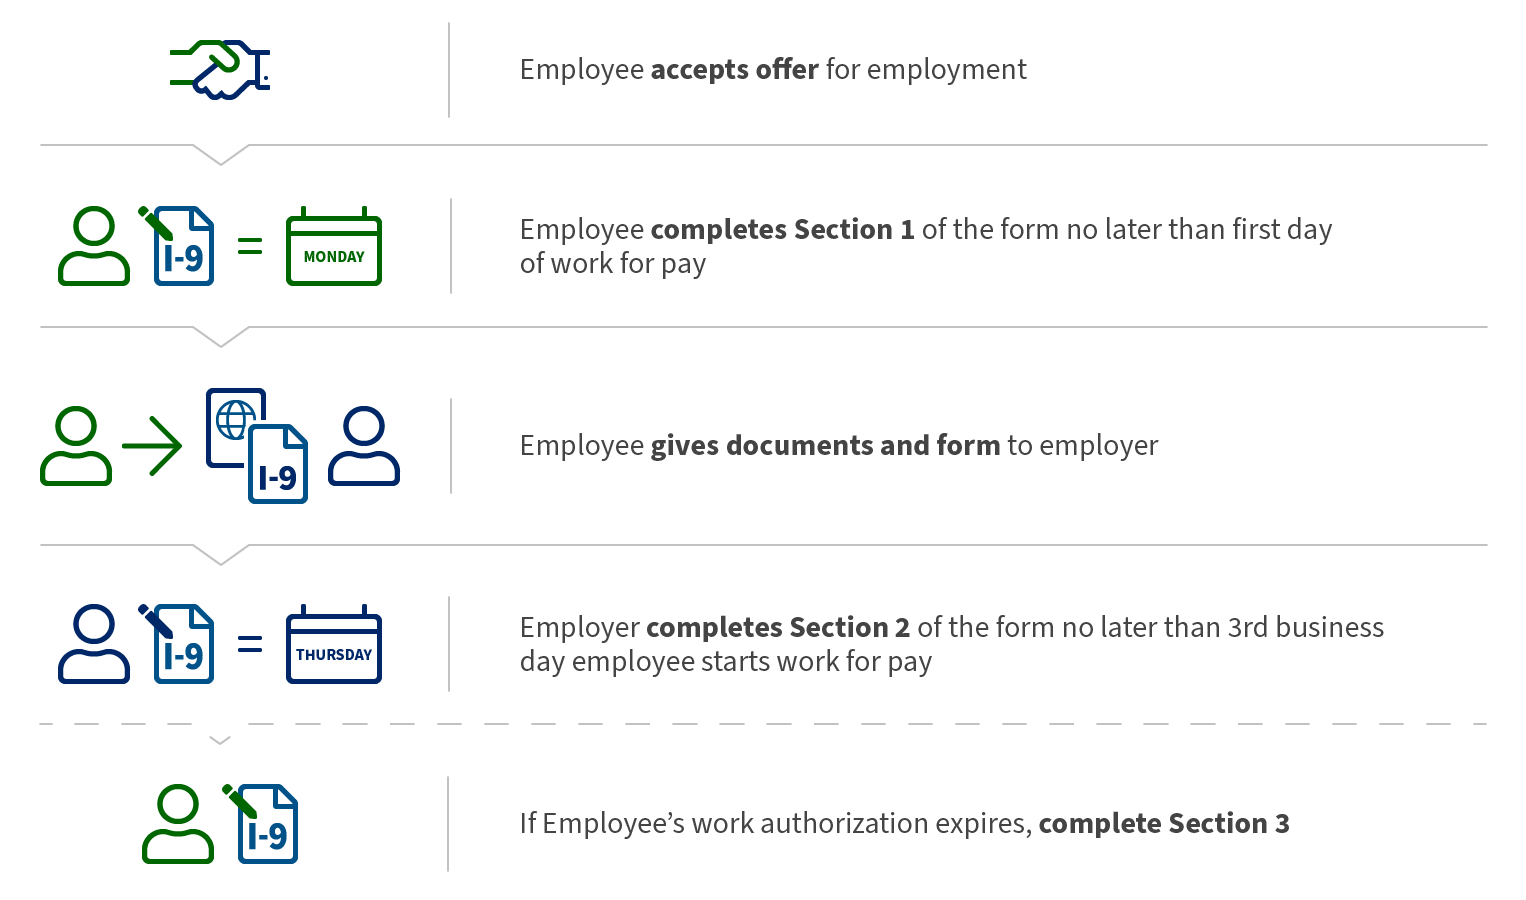 First section - Employee accepts offer for employment. Second section - Employee completes Secton 1 of the form no later than the first day of the work for pay. Third section – Employee gives document and form to employer. Fourth section – Employer completes Section 2 of the form no later than the 3rd business day employee starts work for pay. Fifth section – If employee’s work authorization expires, complete section 3.